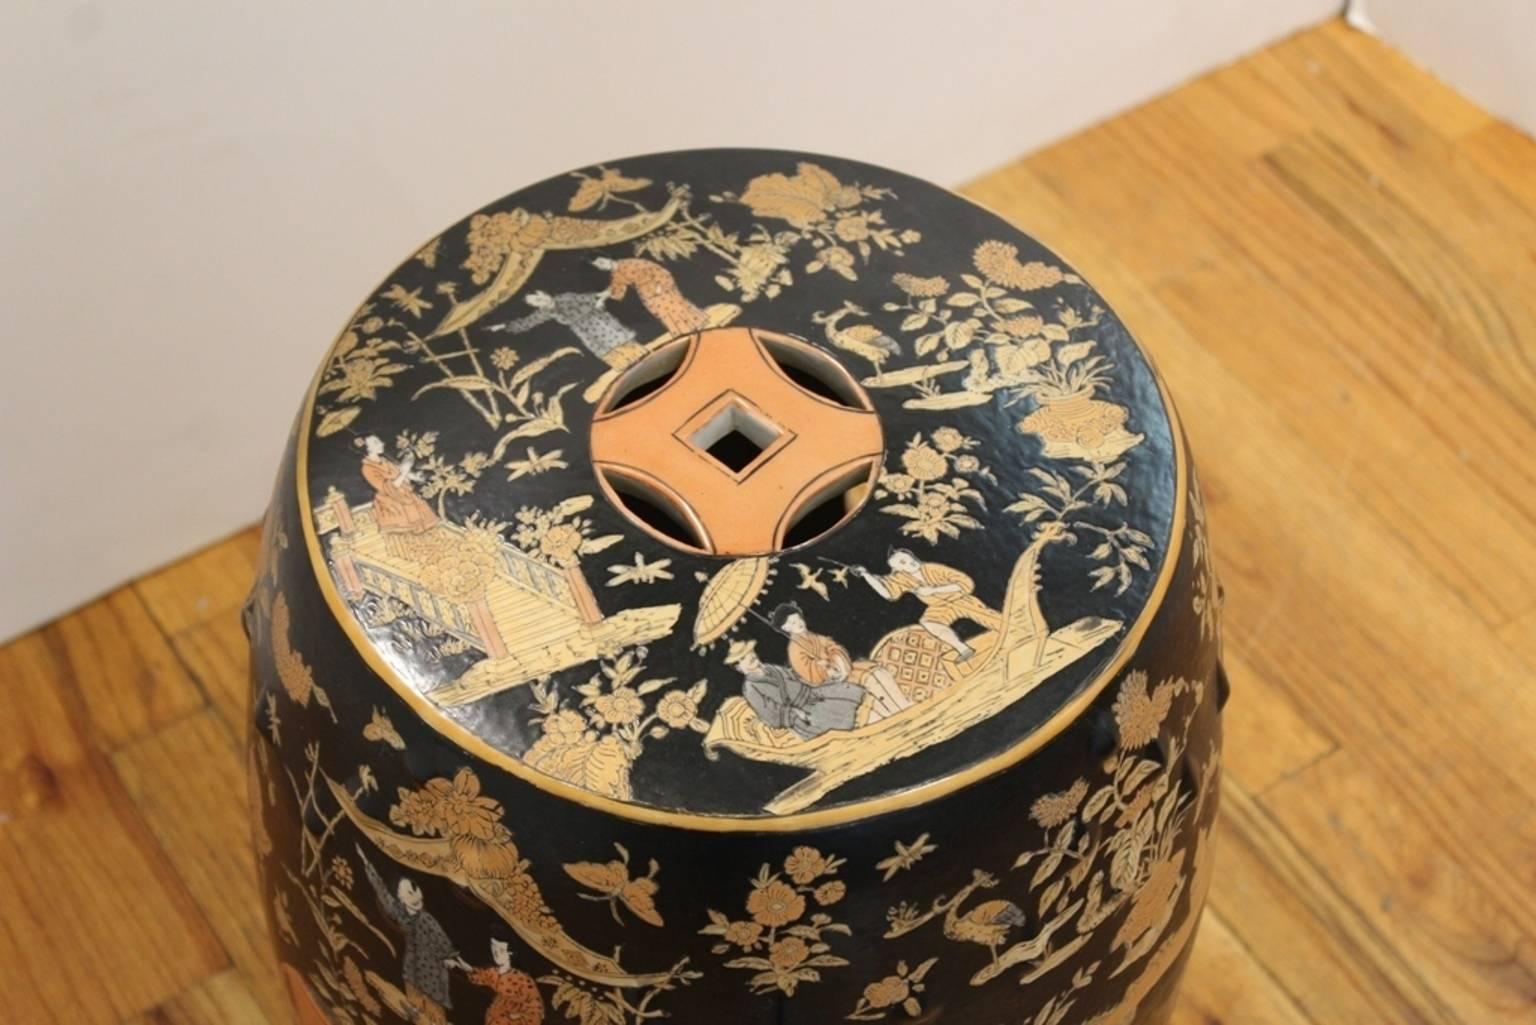 Chinoiserie Garden Stool with Landscapes 3